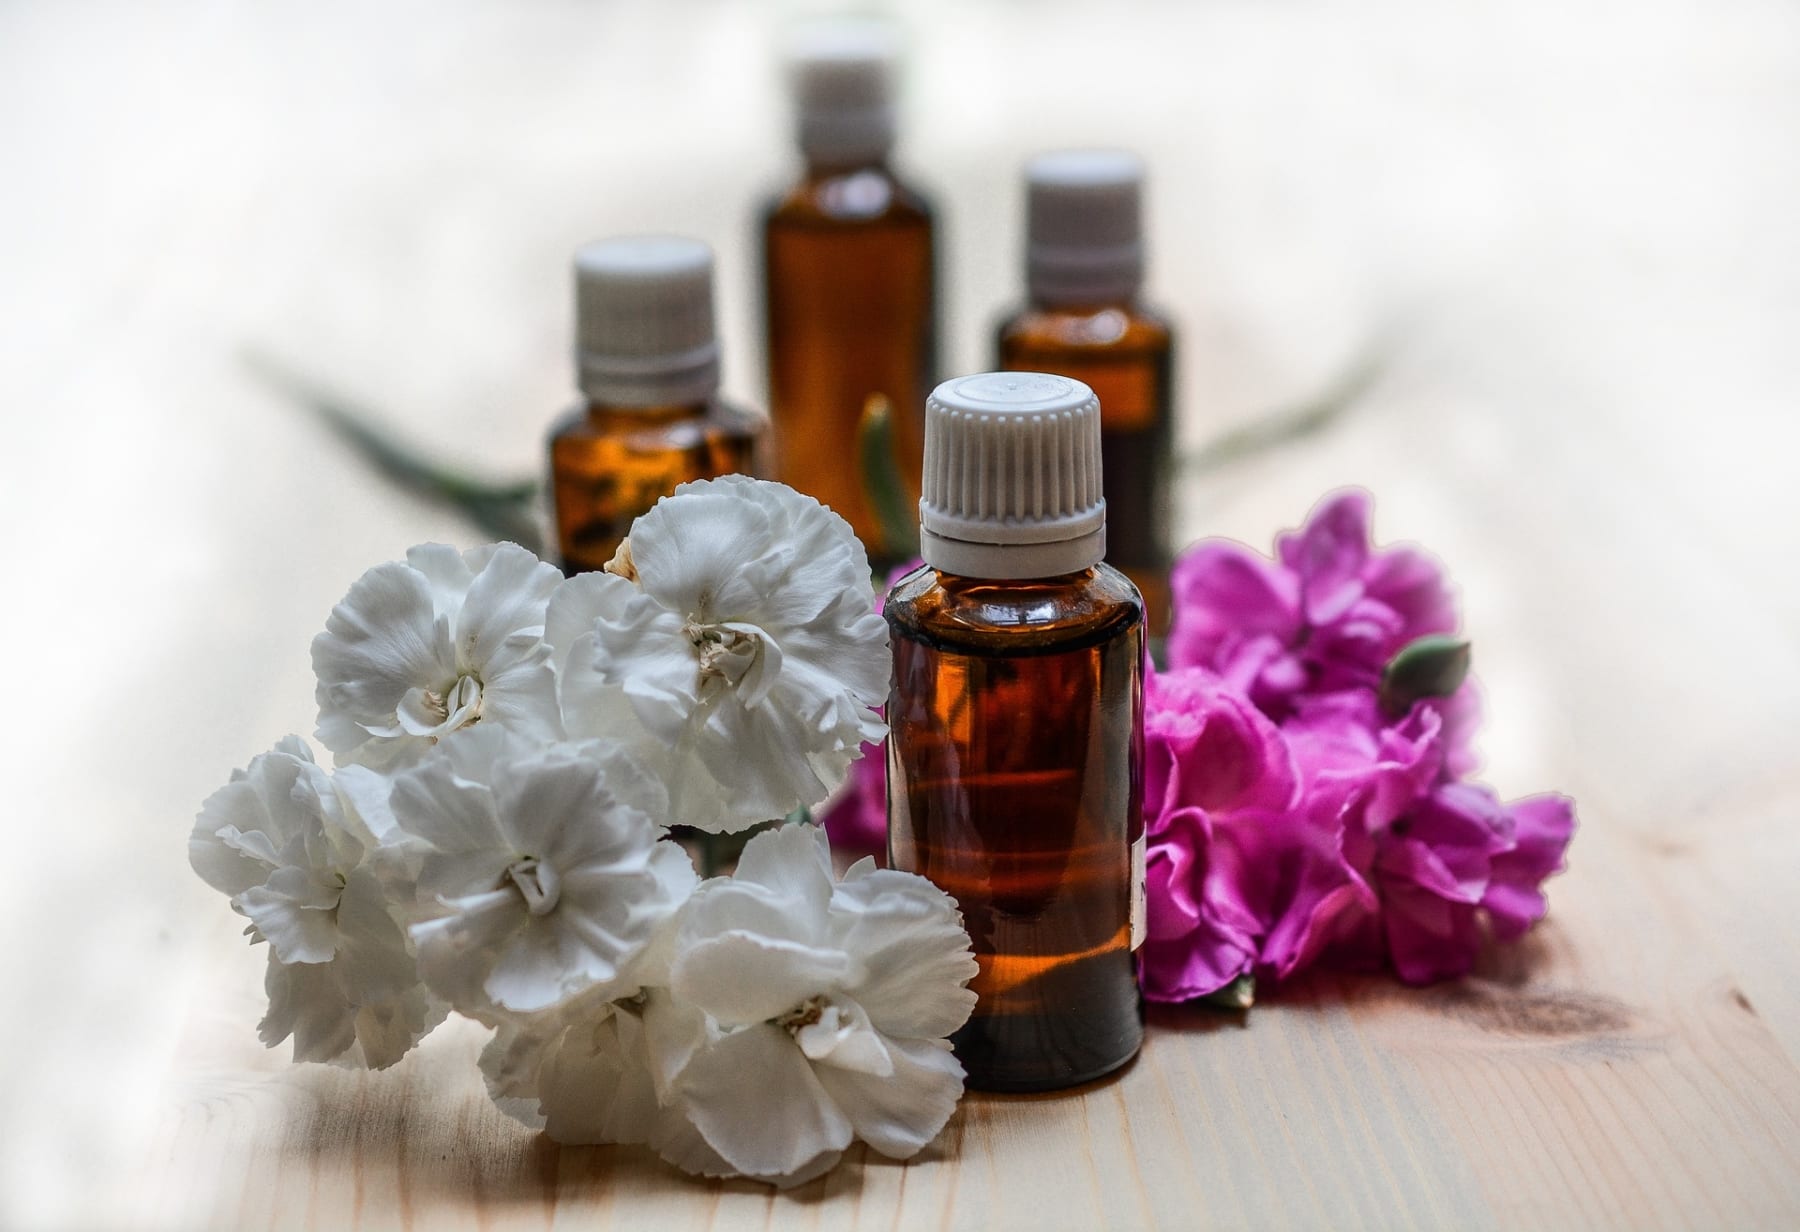 What is an Essential Oil?